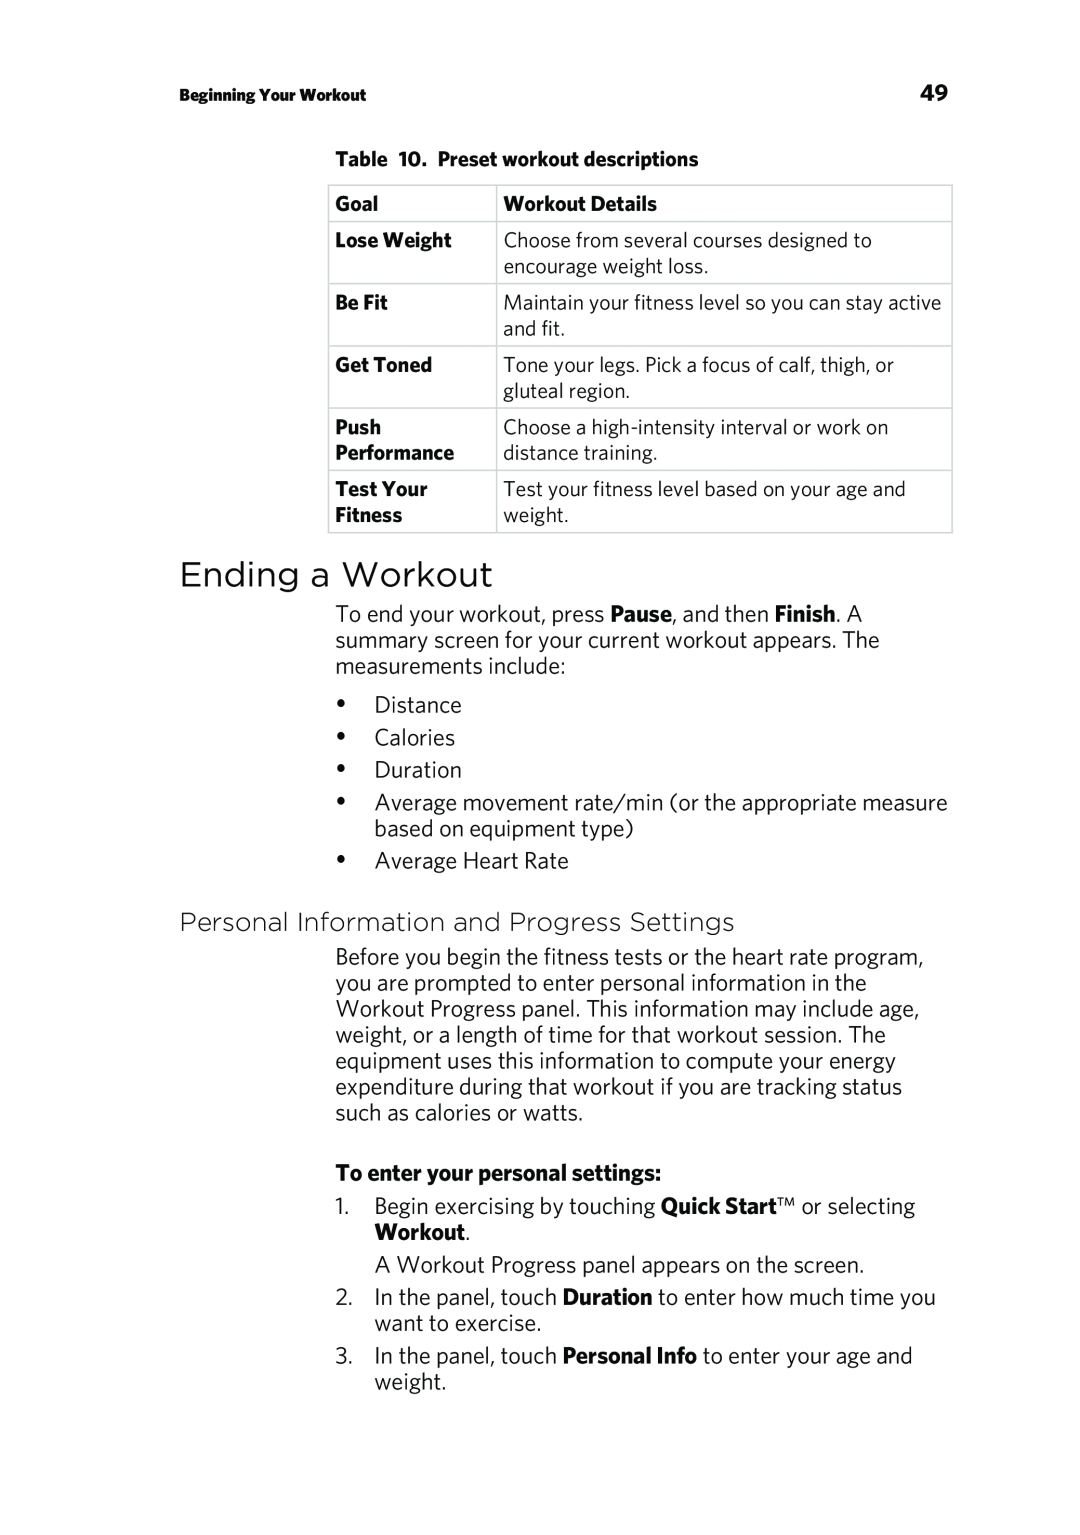 Precor P80 manual Ending a Workout, Personal Information and Progress Settings, To enter your personal settings 